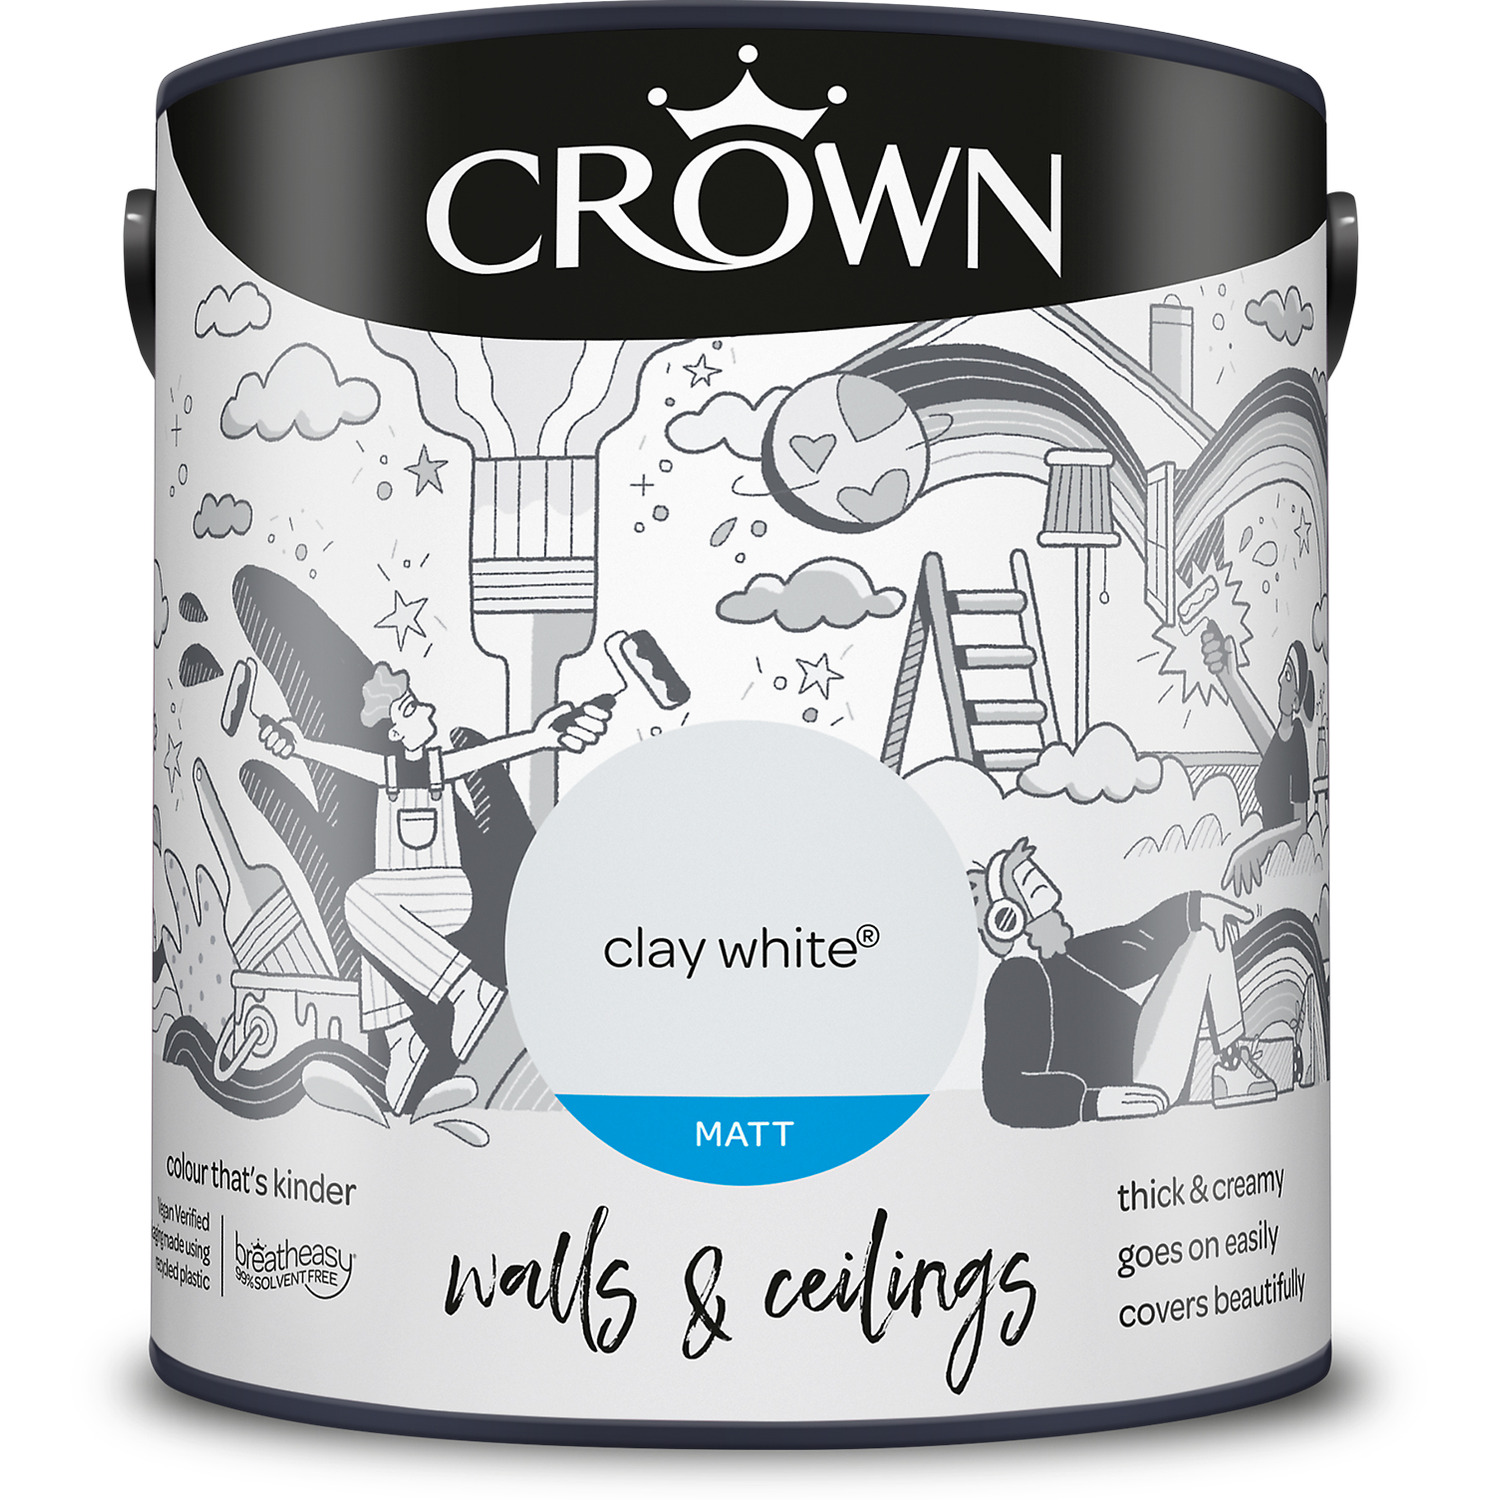 Crown Wall and Ceilings Clay White Matt Emulsion Paint Image 2